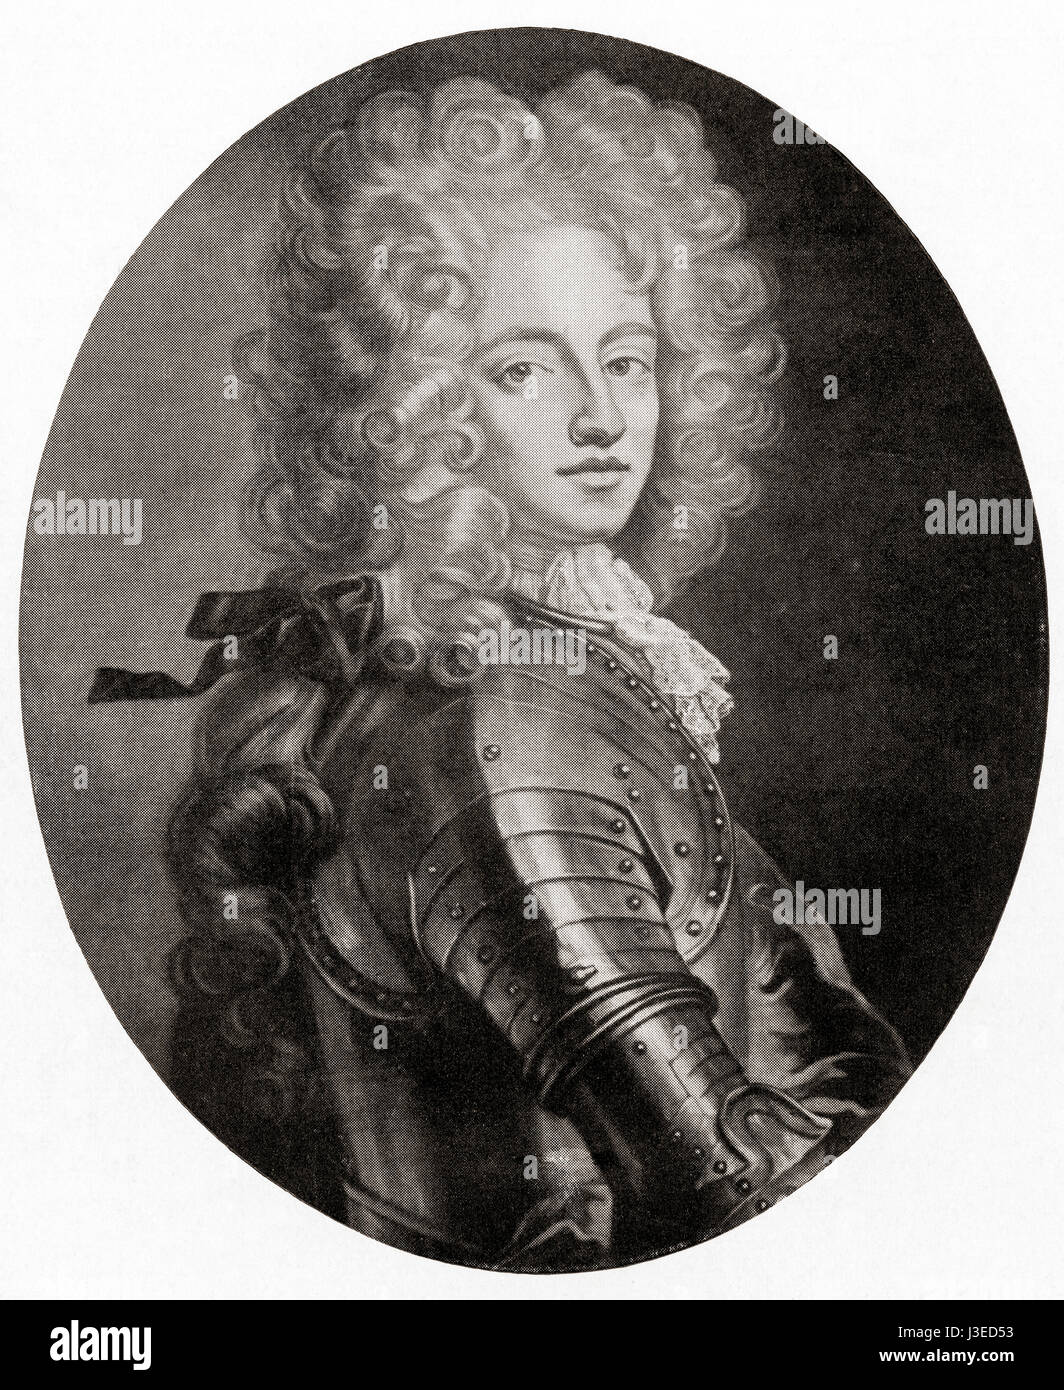 Charles XII, also Carl, 1682 – 1718.  King of Sweden from 1697 to 1718.  From Hutchinson's History of the Nations, published 1915. Stock Photo